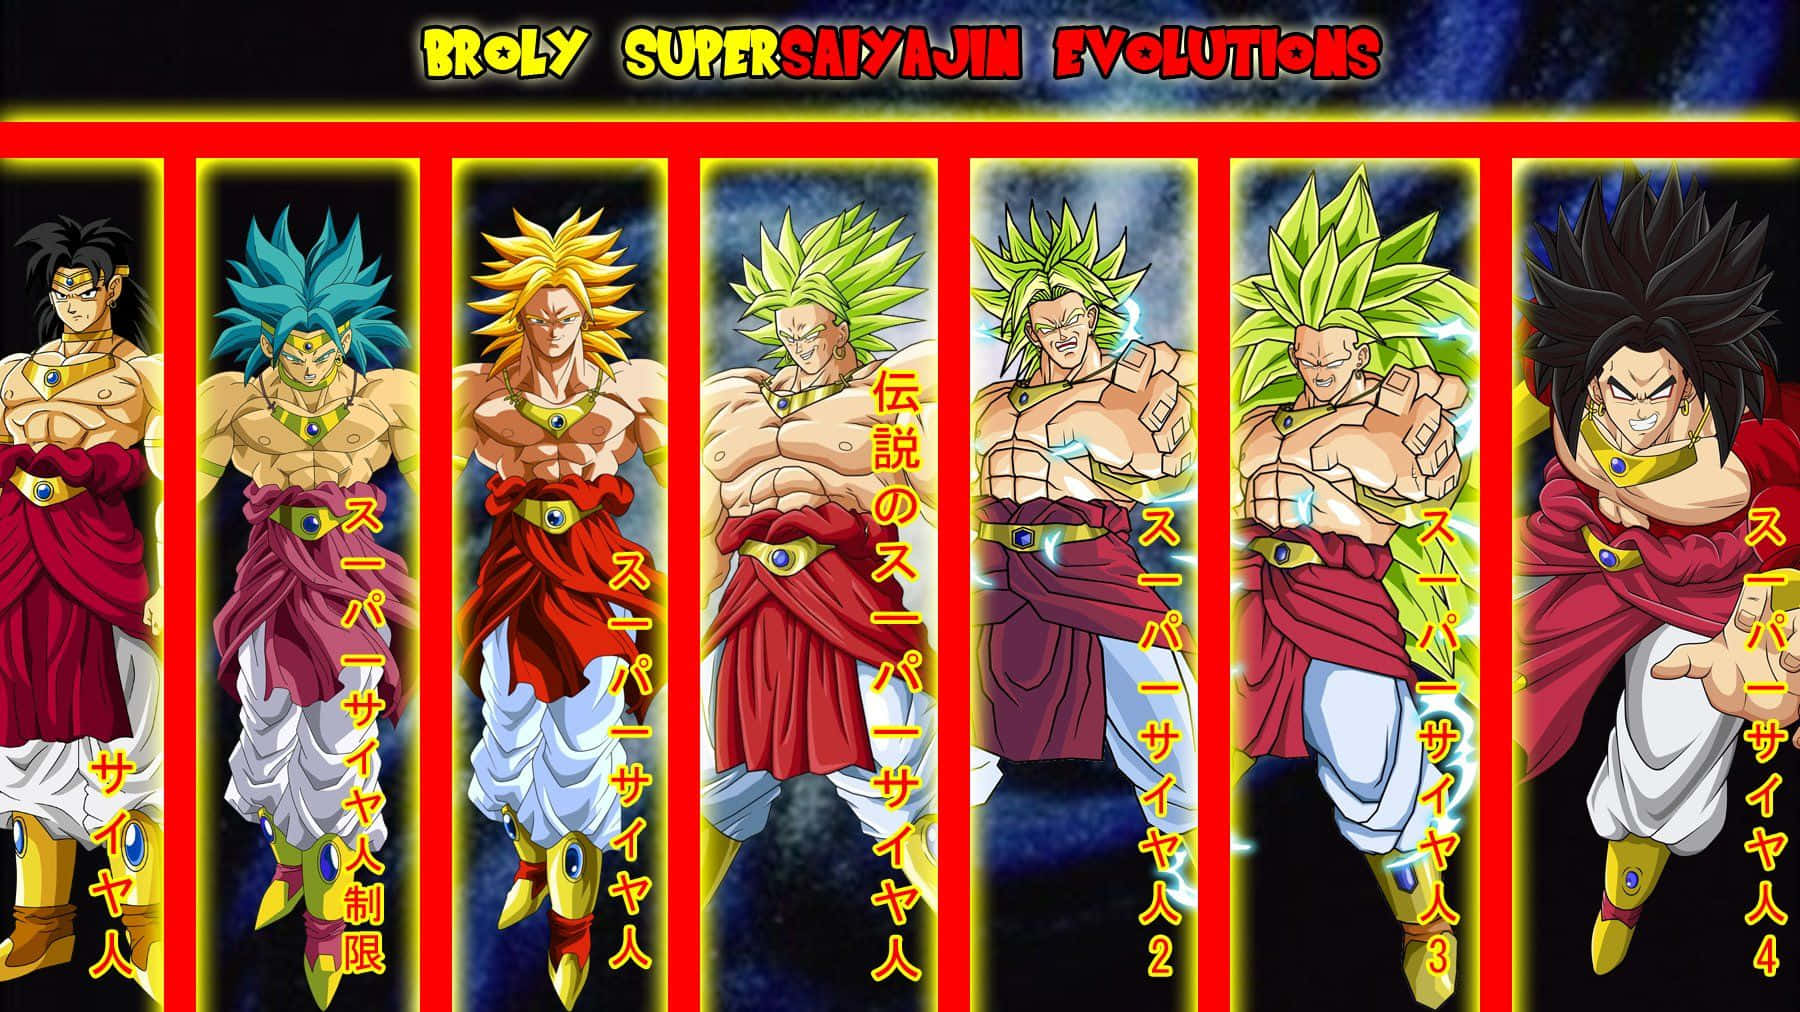 Broly from the "Dragon Ball Z" series, ready for battle with unparalleled strength. Wallpaper